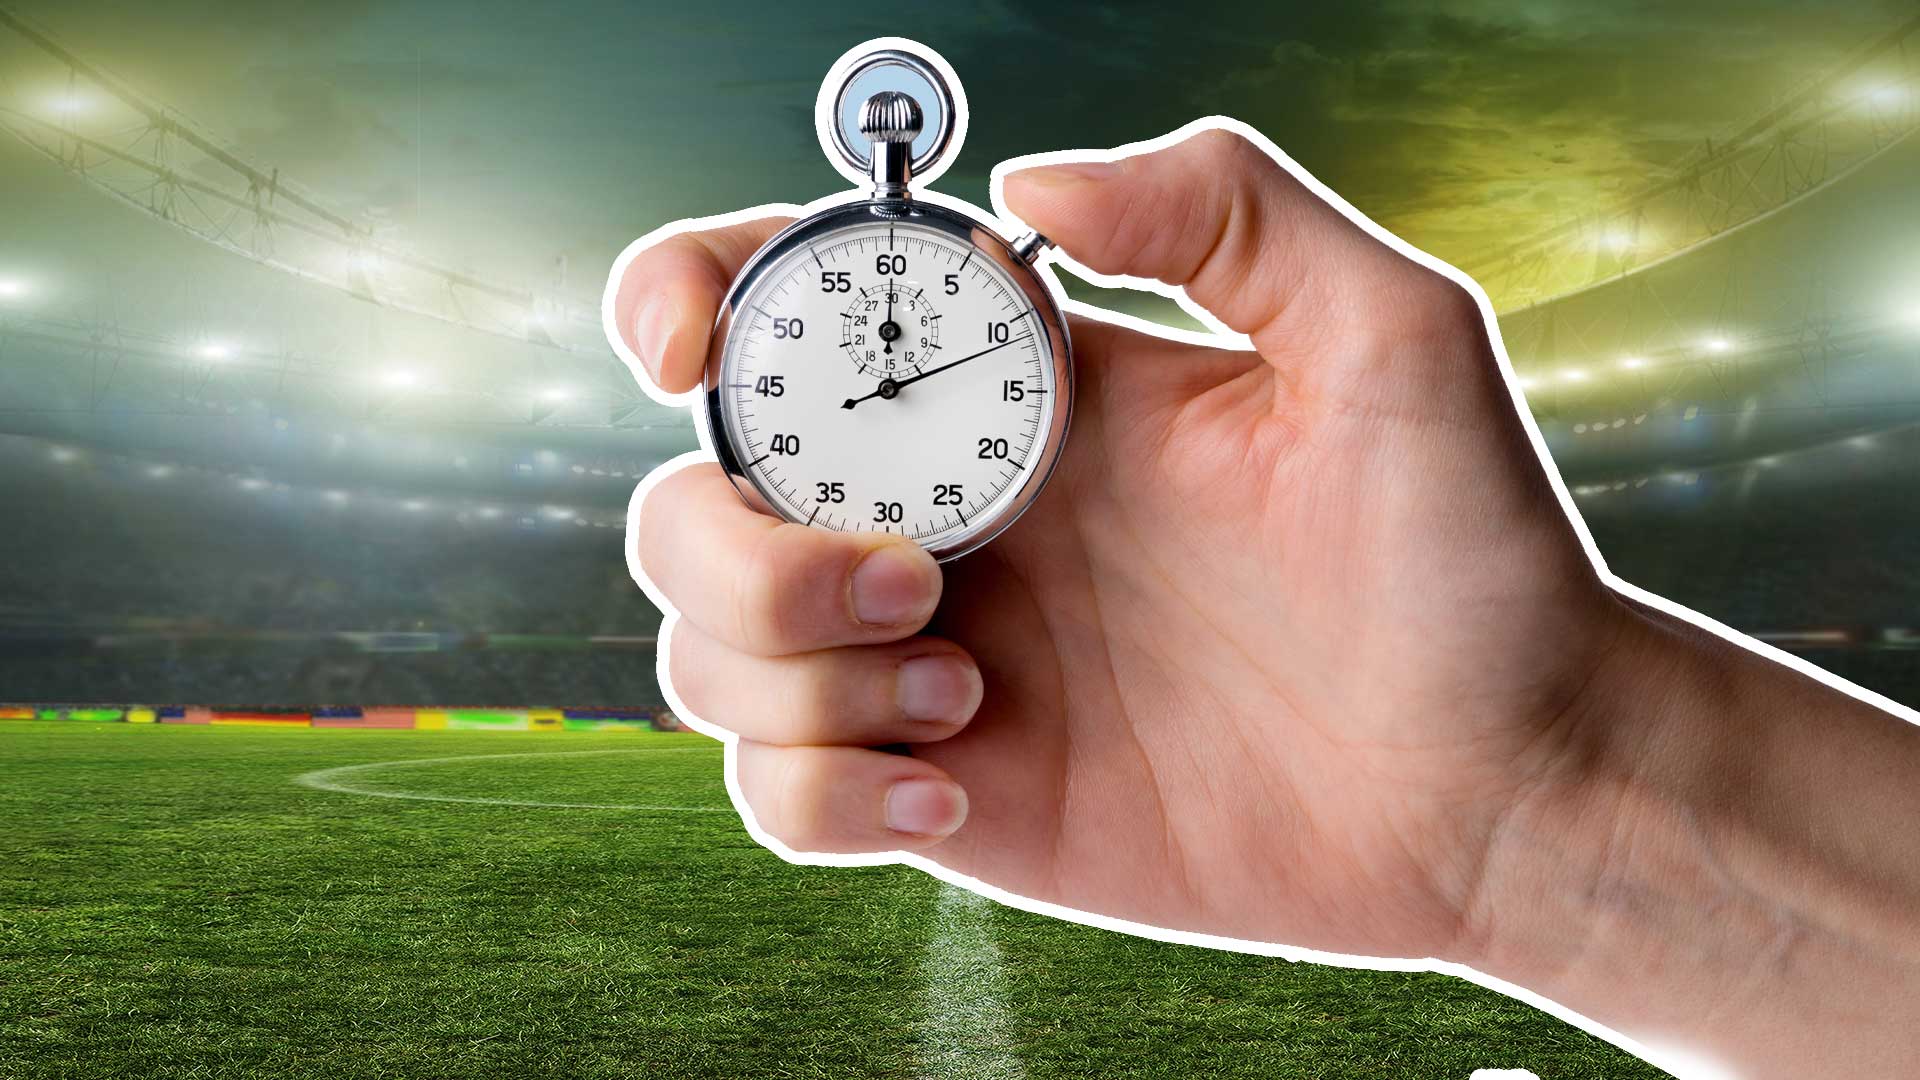 A stop watch with a football pitch in the background